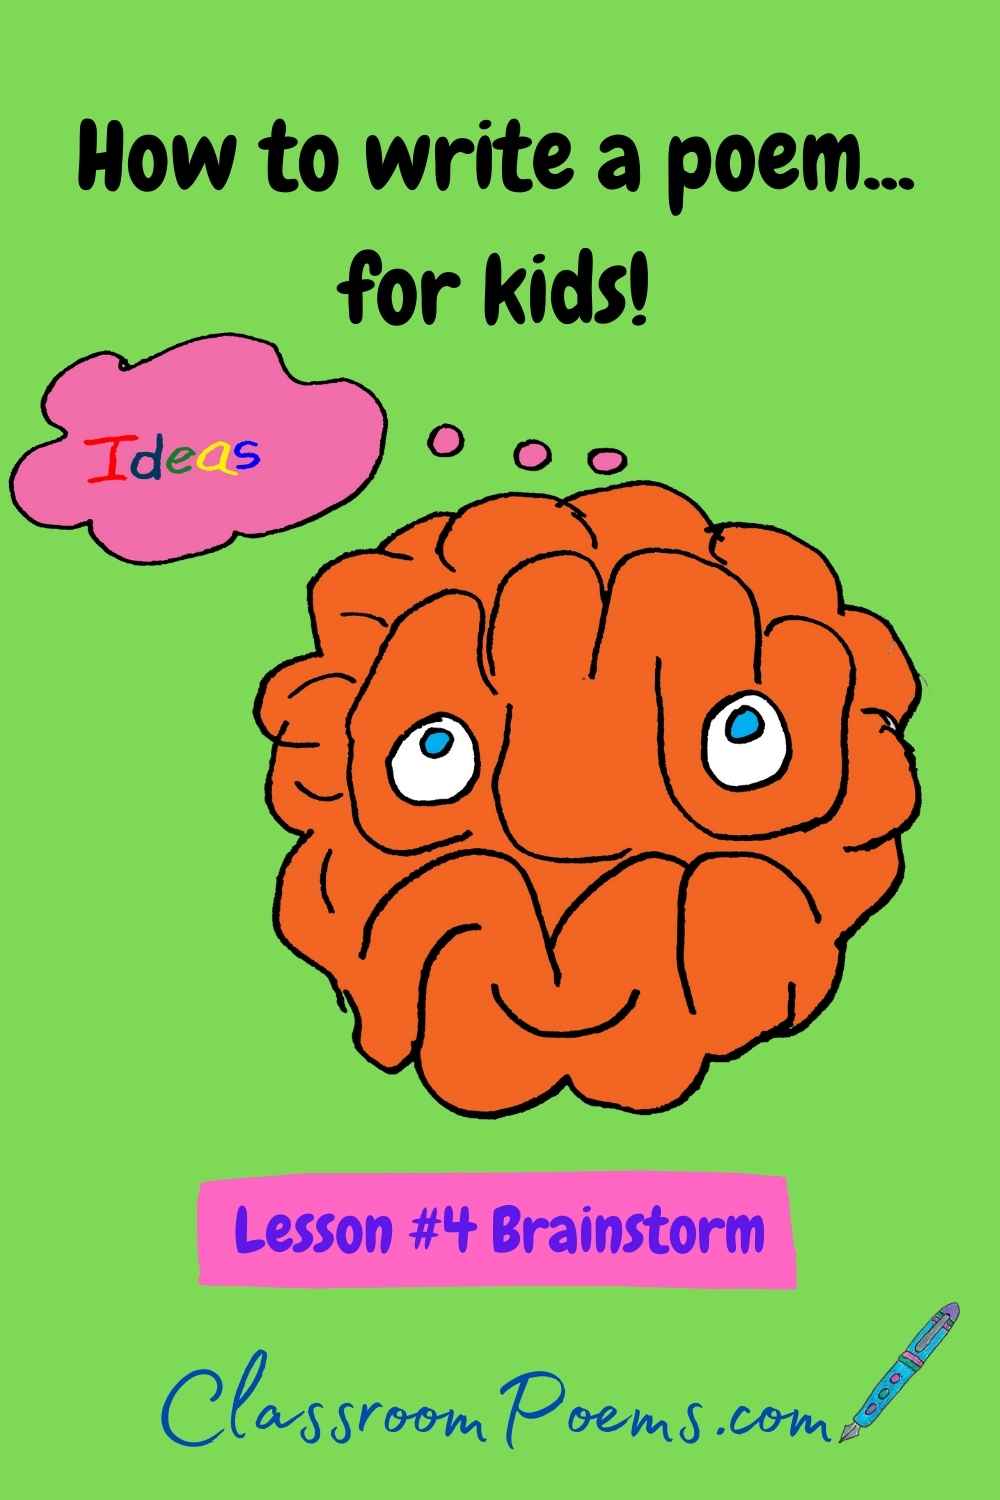 How to teach poetry to kids. Brainstorm.